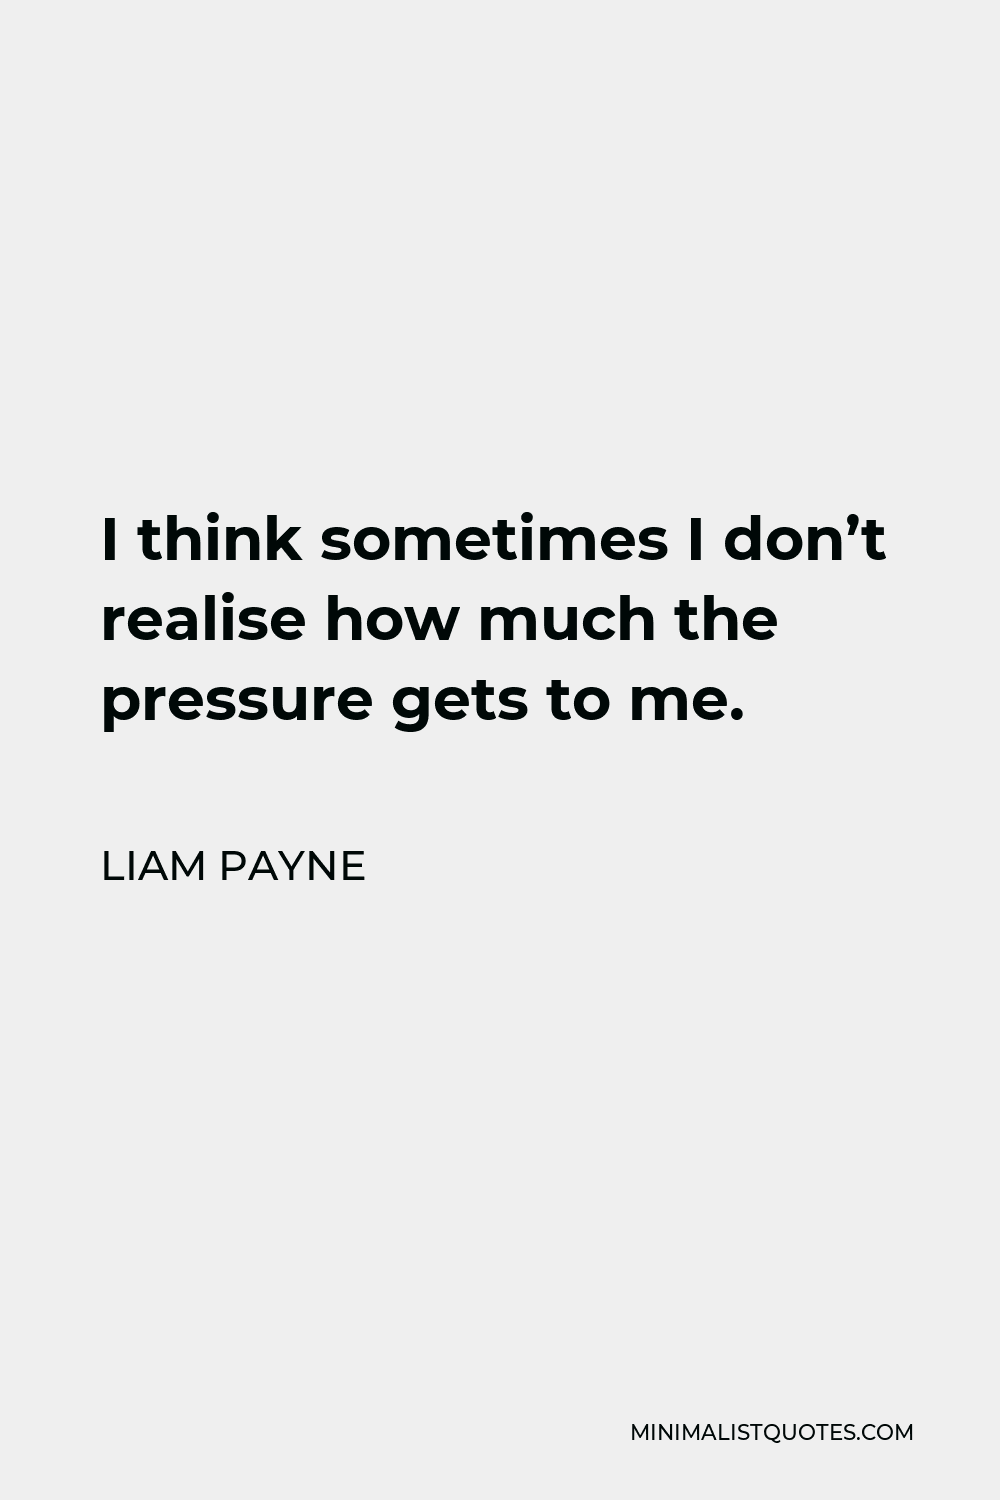 Liam Payne Quote - I think sometimes I don’t realise how much the pressure gets to me.